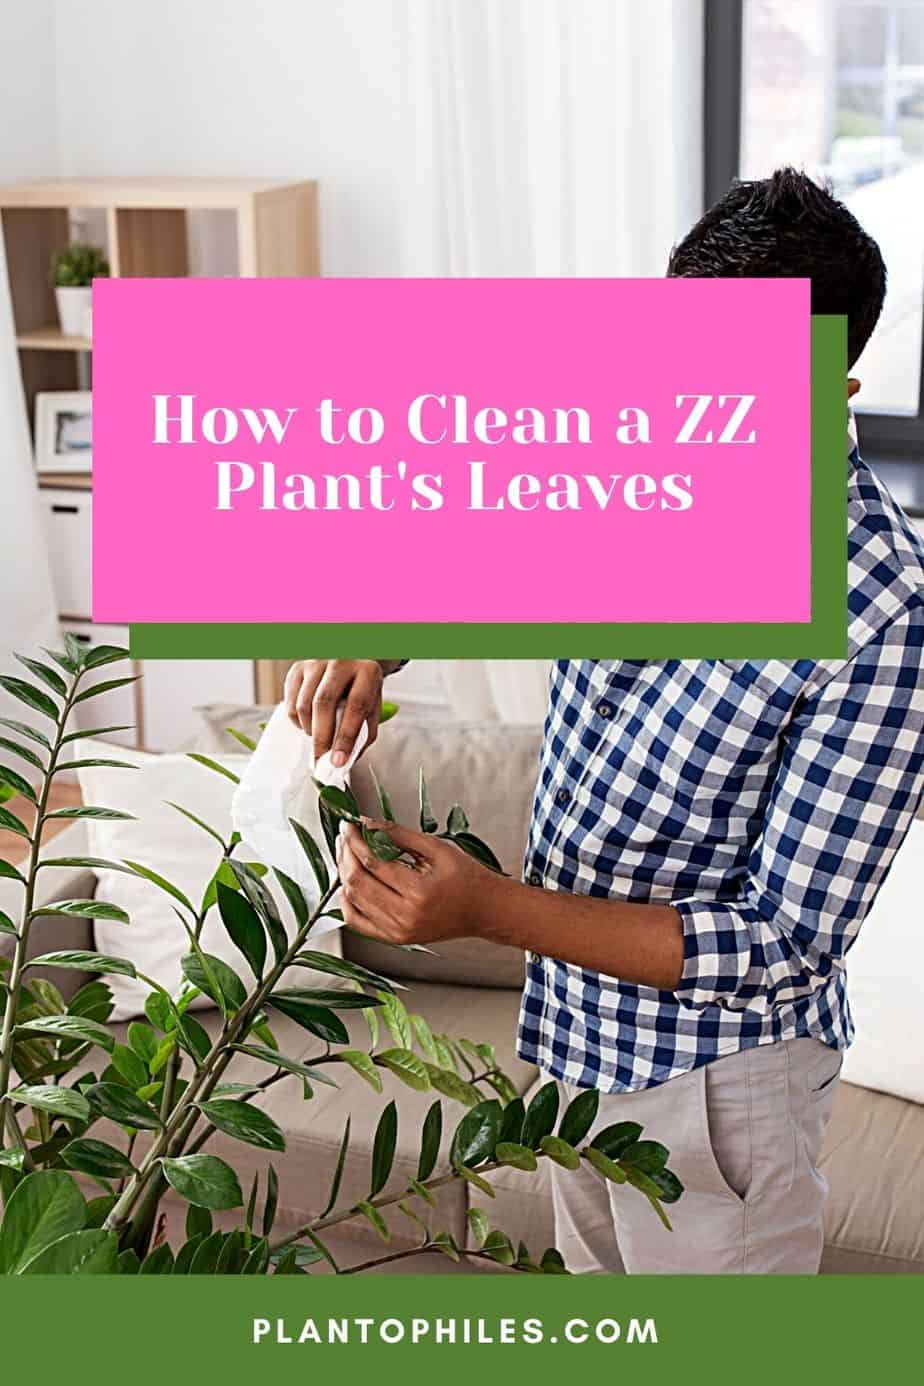 How to Clean a ZZ Plant’s Leaves